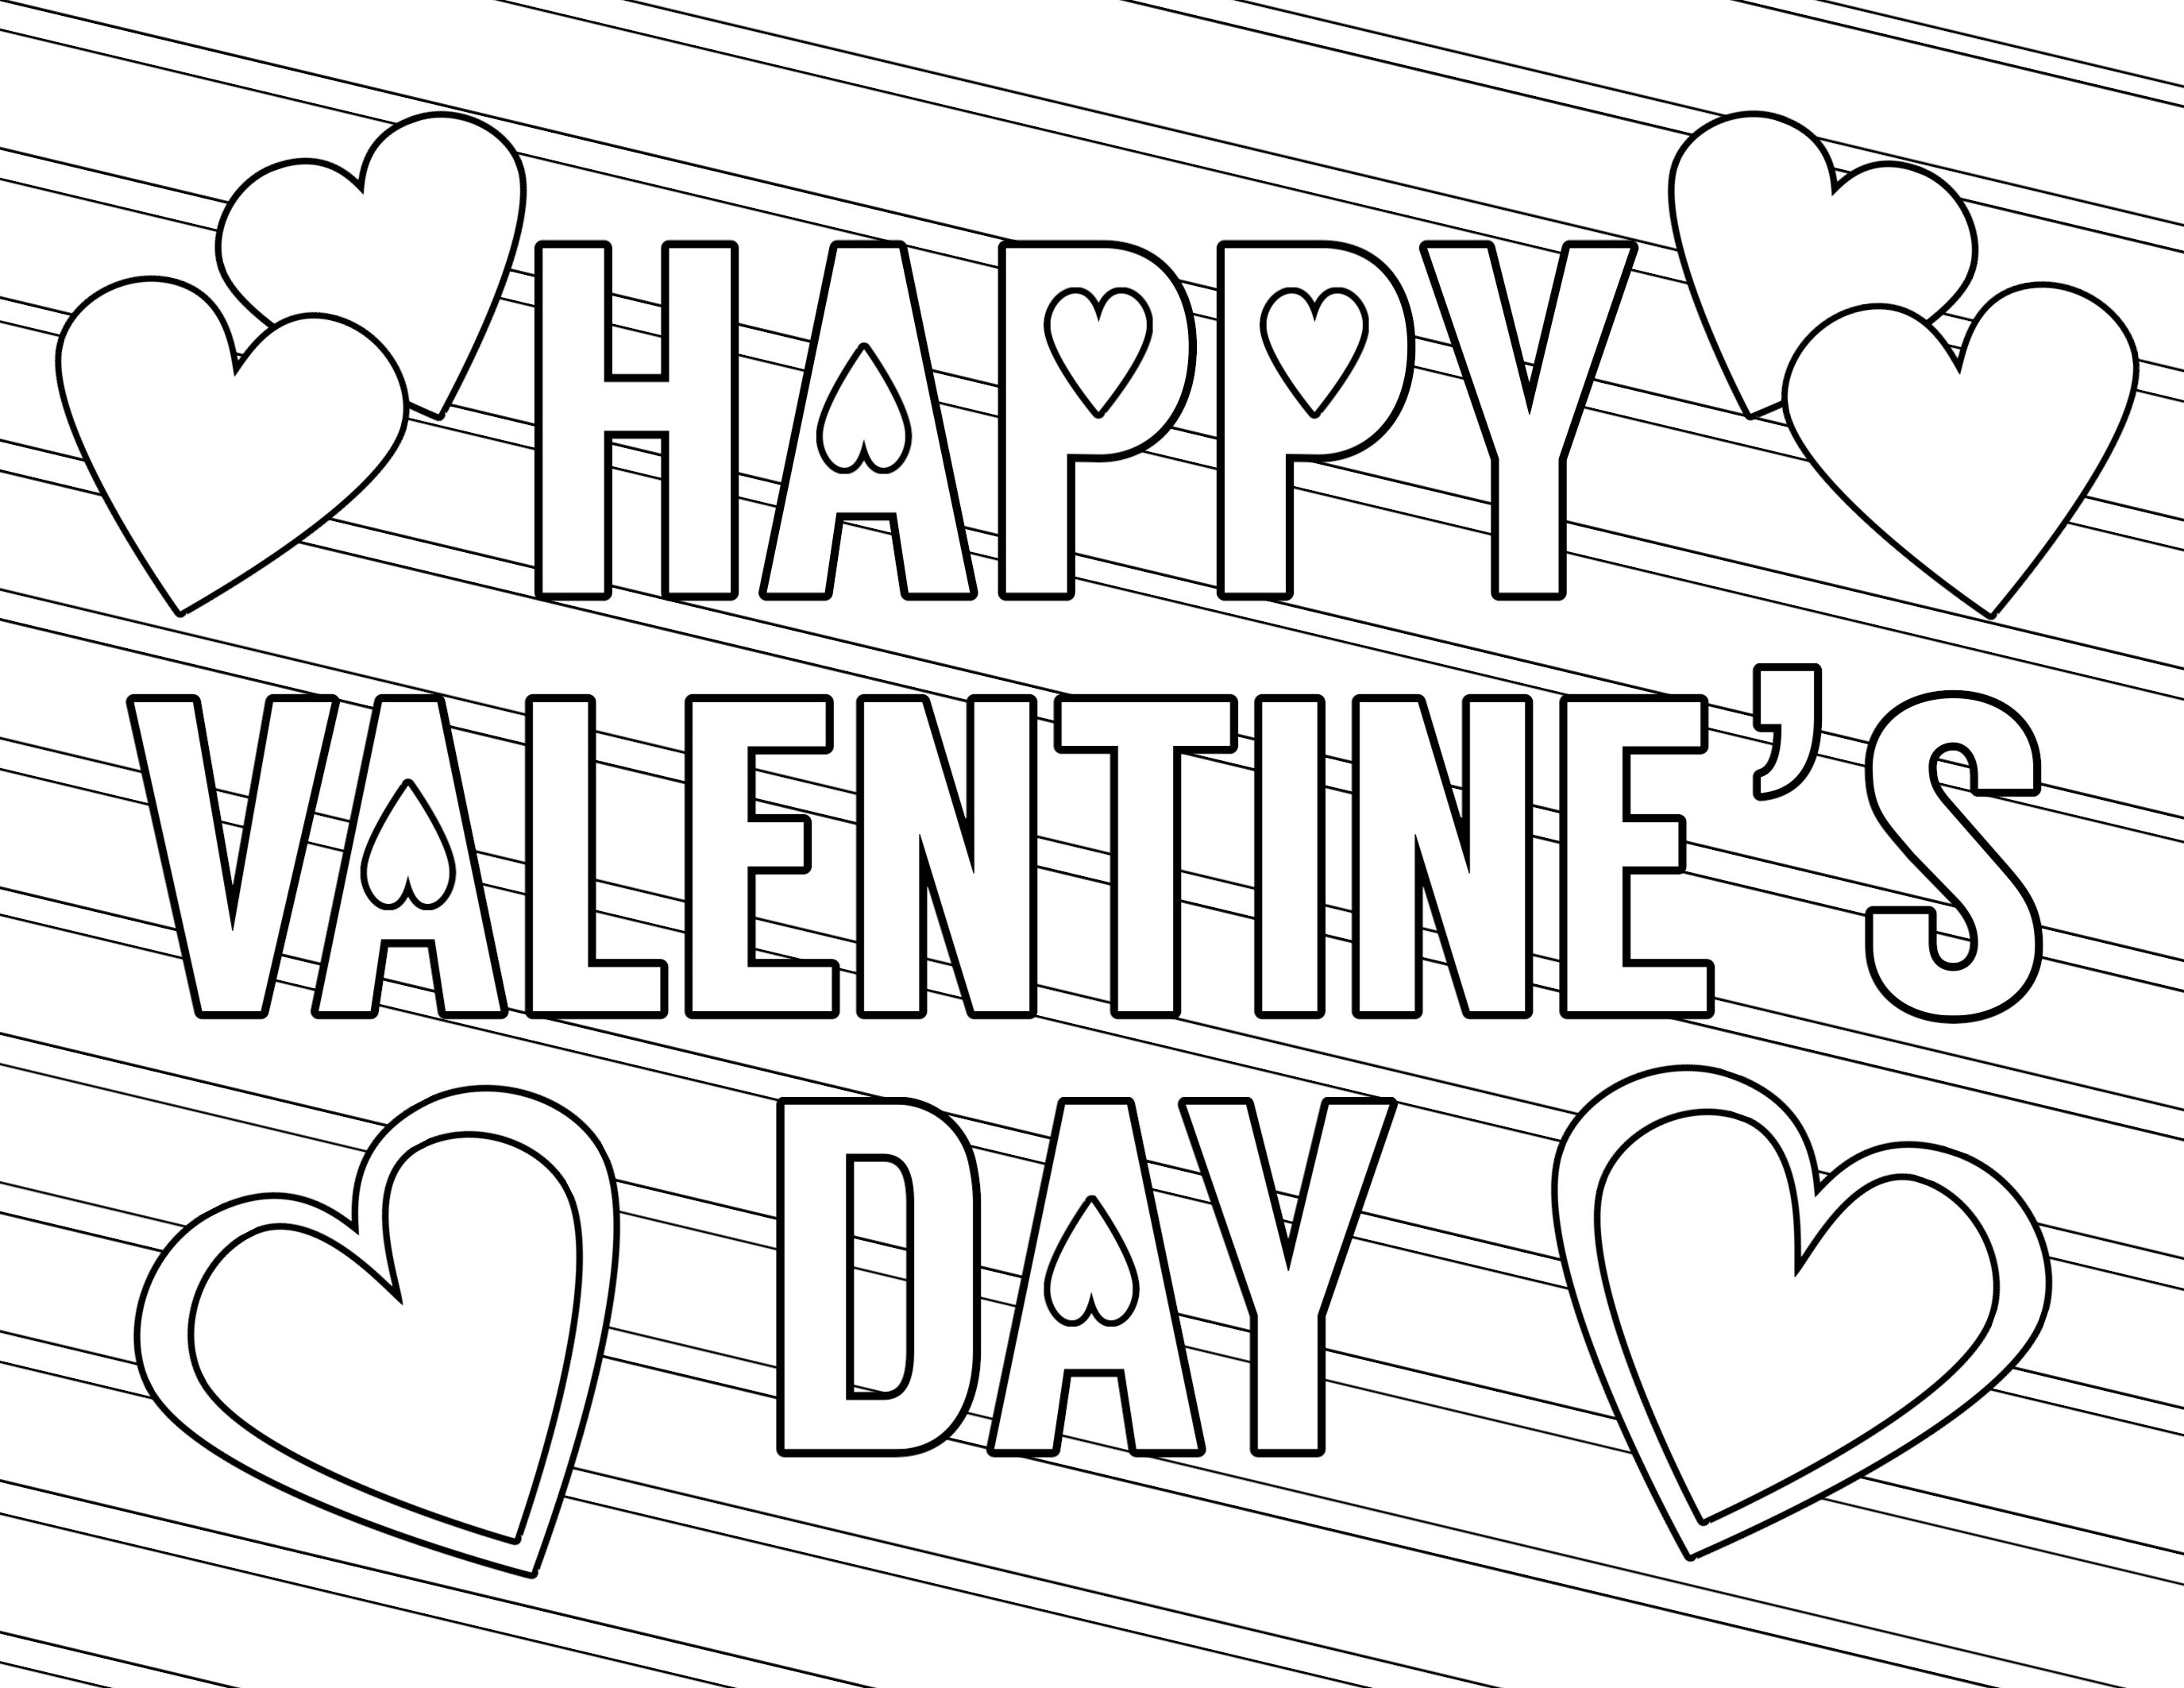 Coloring Ideas : Stunning Free Valentines Day Coloring Pages Page - Free Printable Valentines Day Coloring Pages